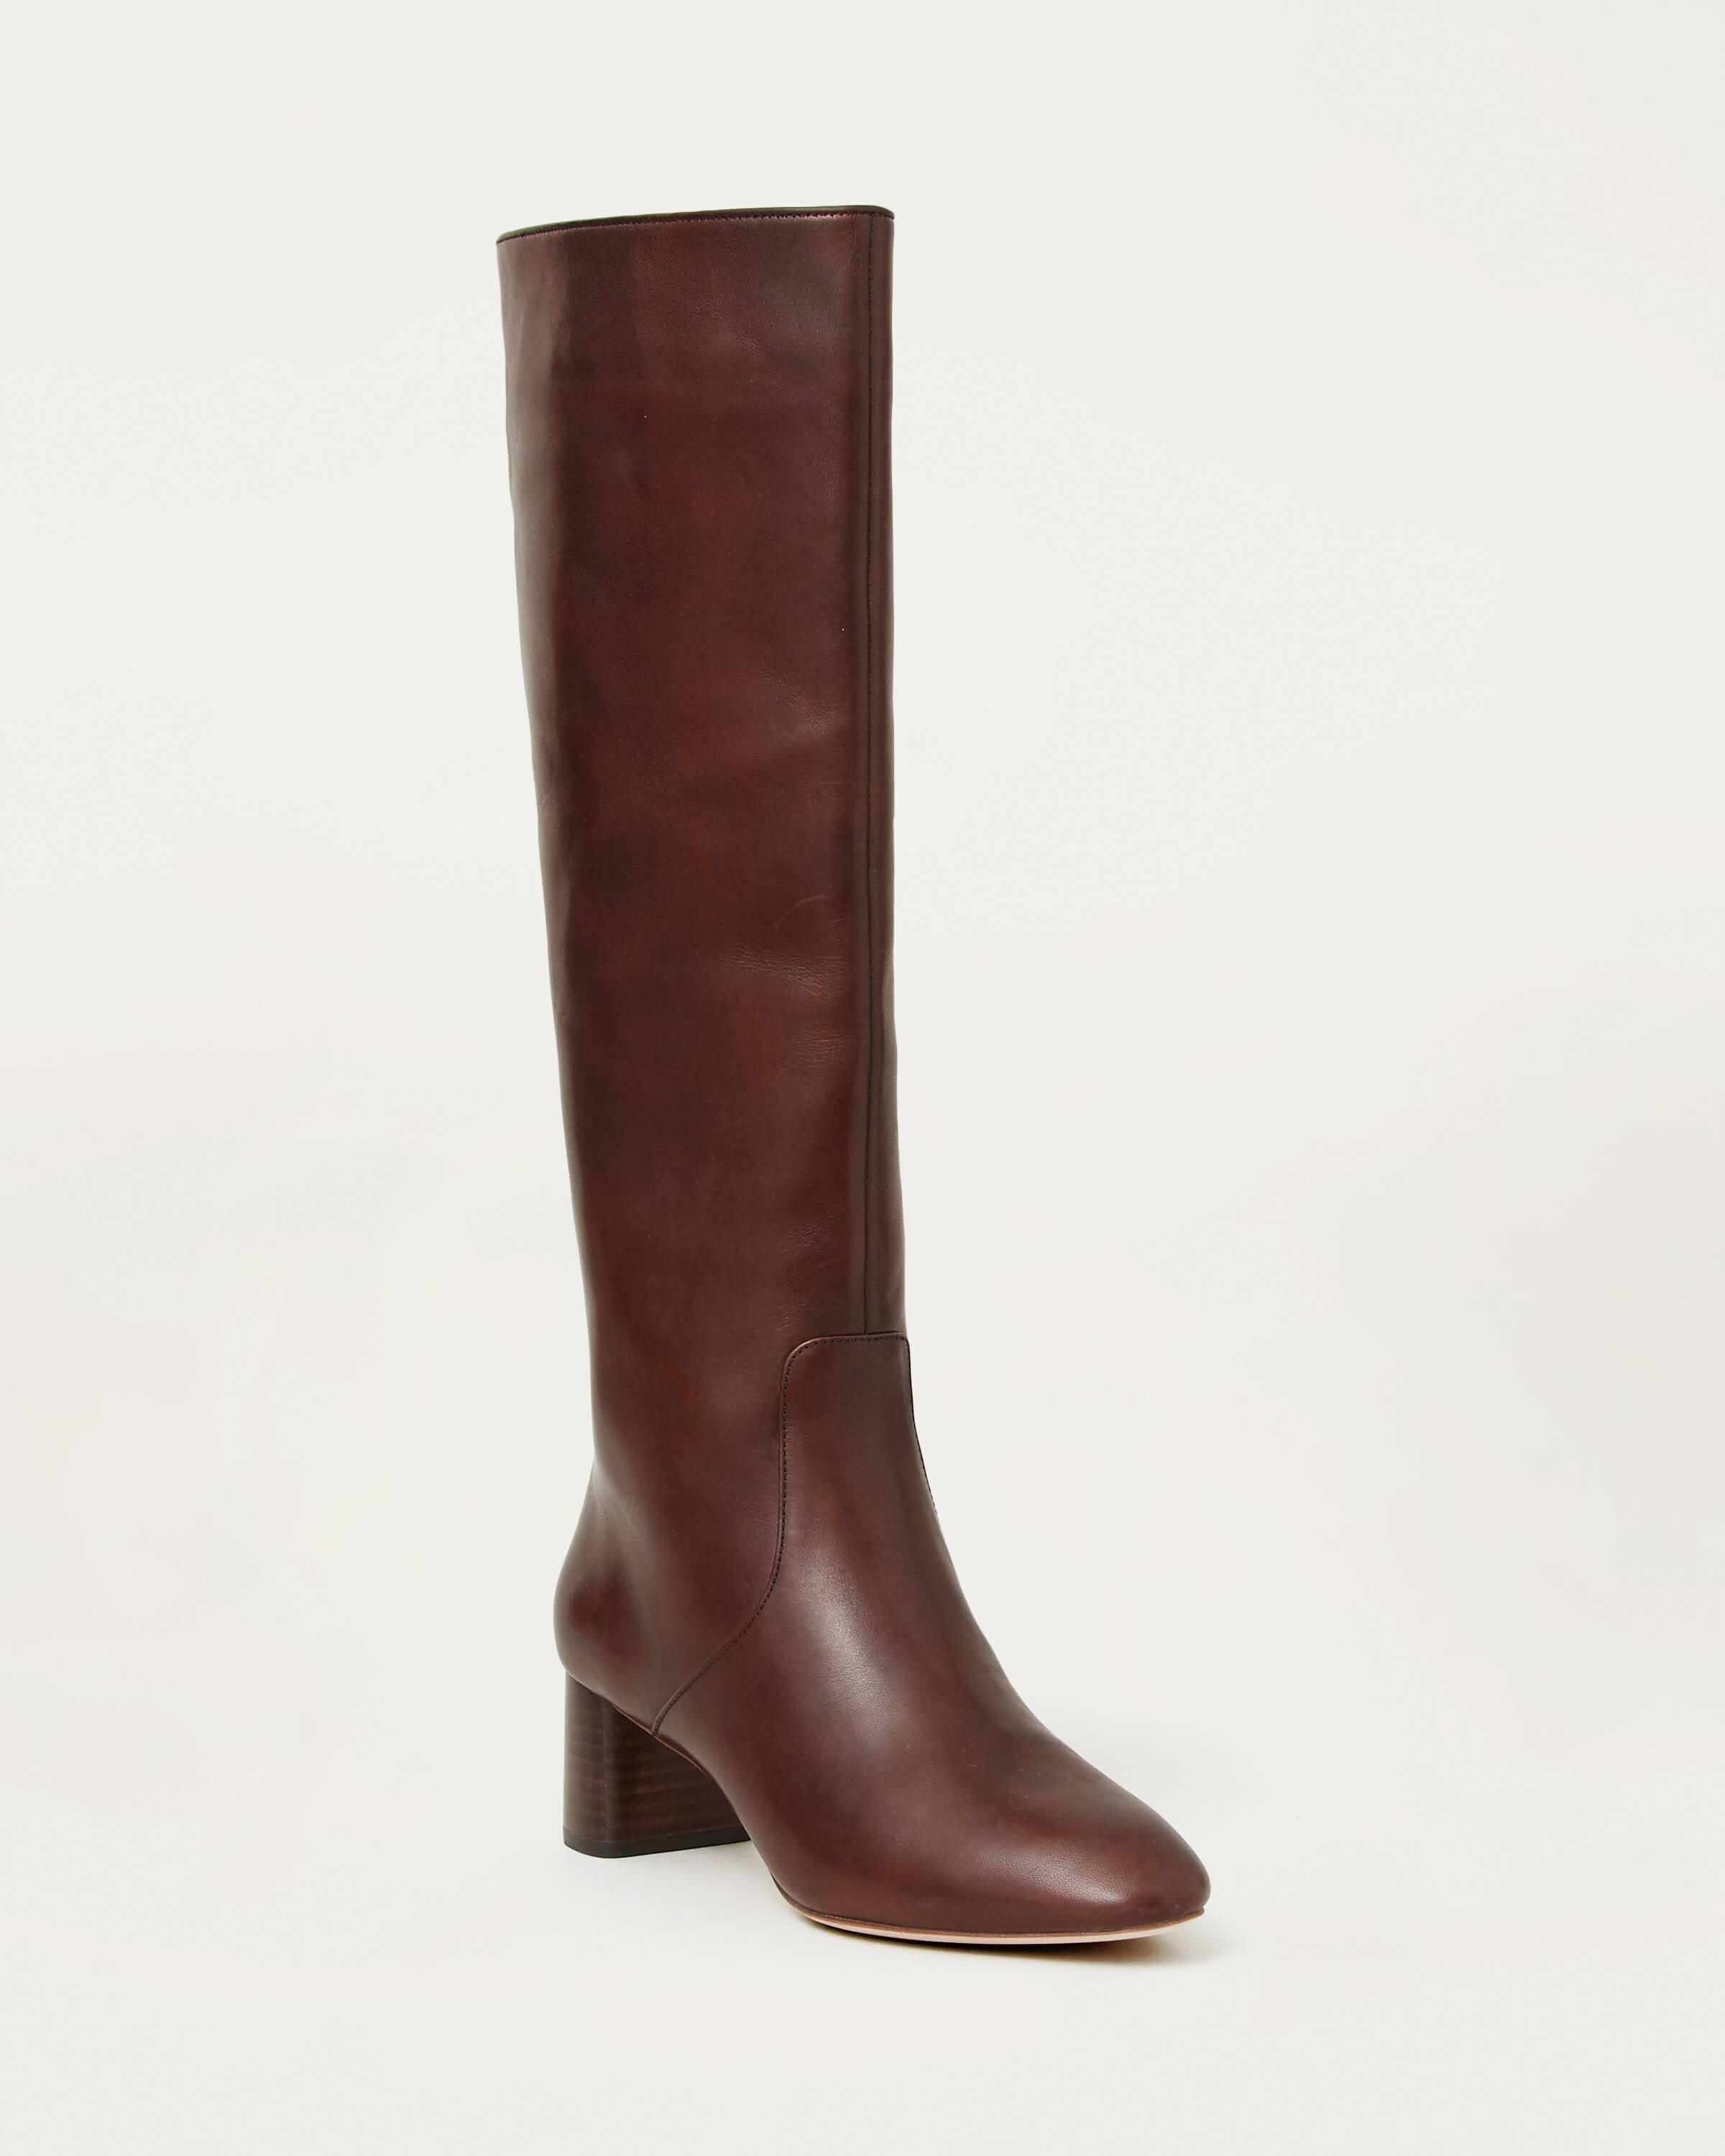 2 inch heel leather boots